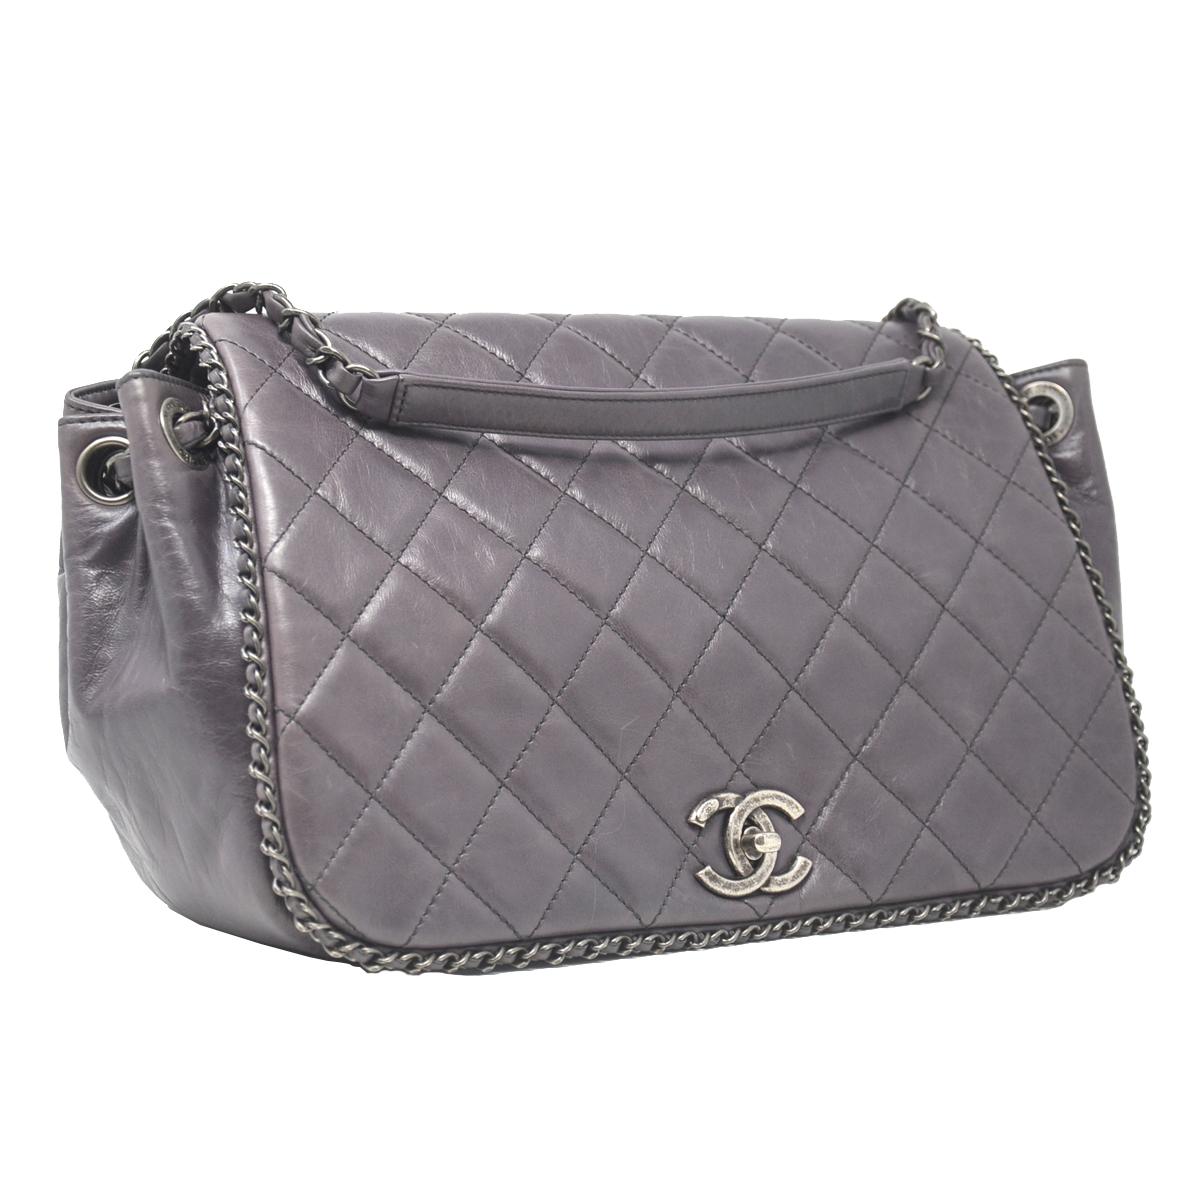 Company-Chanel
Model-Enchained Accordian Chain around Shoulder Bag 
Color-Purple 
Date Code-21423454
Material-Glazed Quilted Calfskin
Measurements-11.5